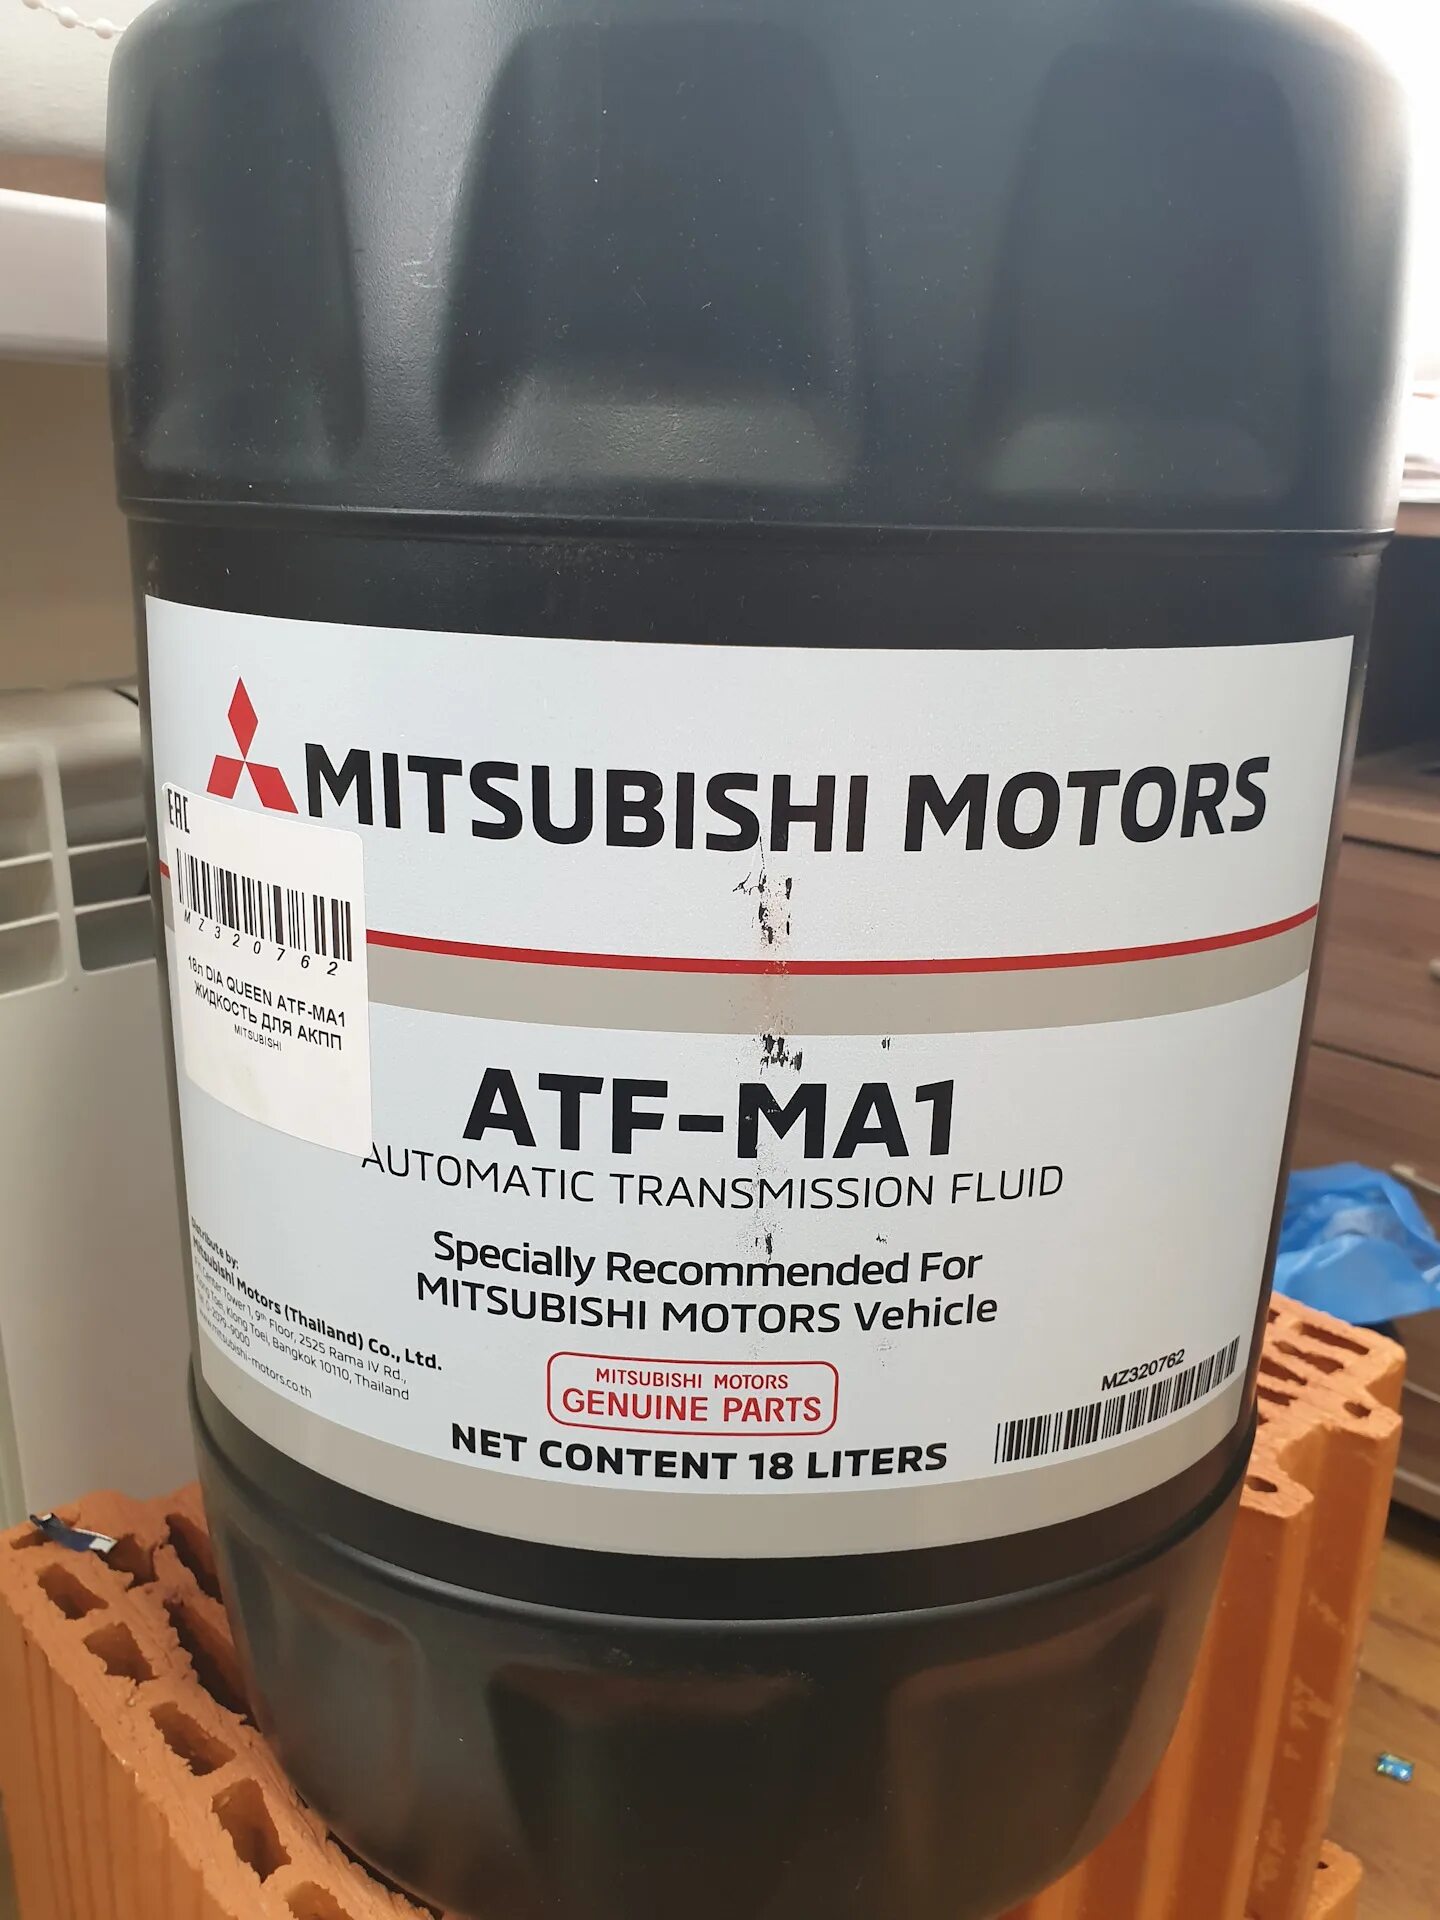 Atf ma1. Масло ATF dia Queen ma1. Mitsubishi dia Queen ATF- ma1. Dia Queen ATF-ma1 артикул. Mitsubishi ATF-ma1 4л артикул.